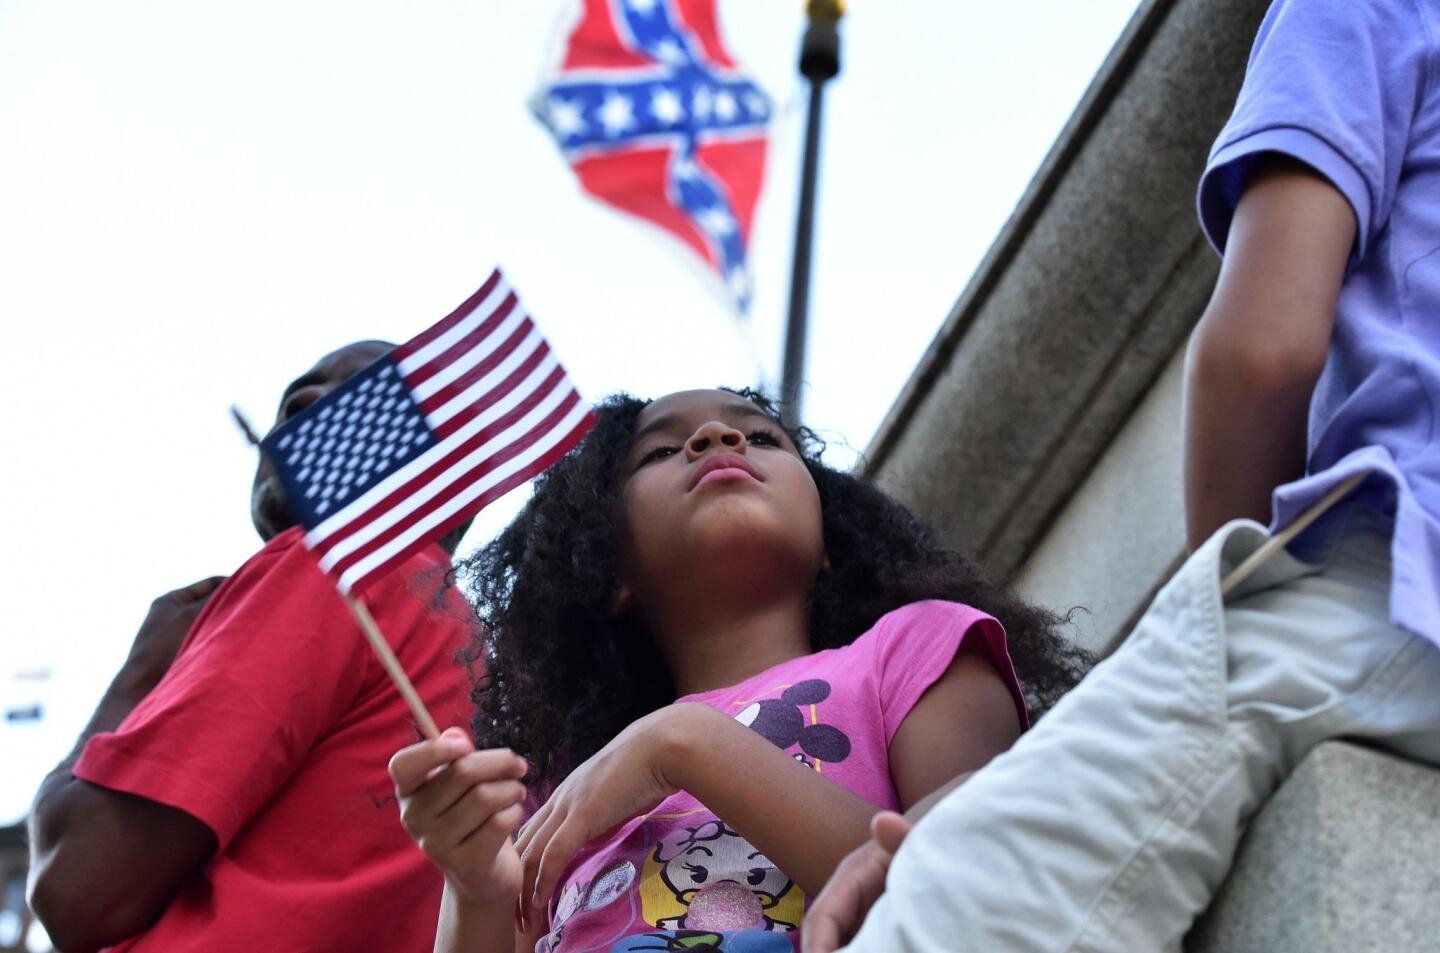 Hundreds of people gather for a protest against the Confederate flag in Columbia, S.C.